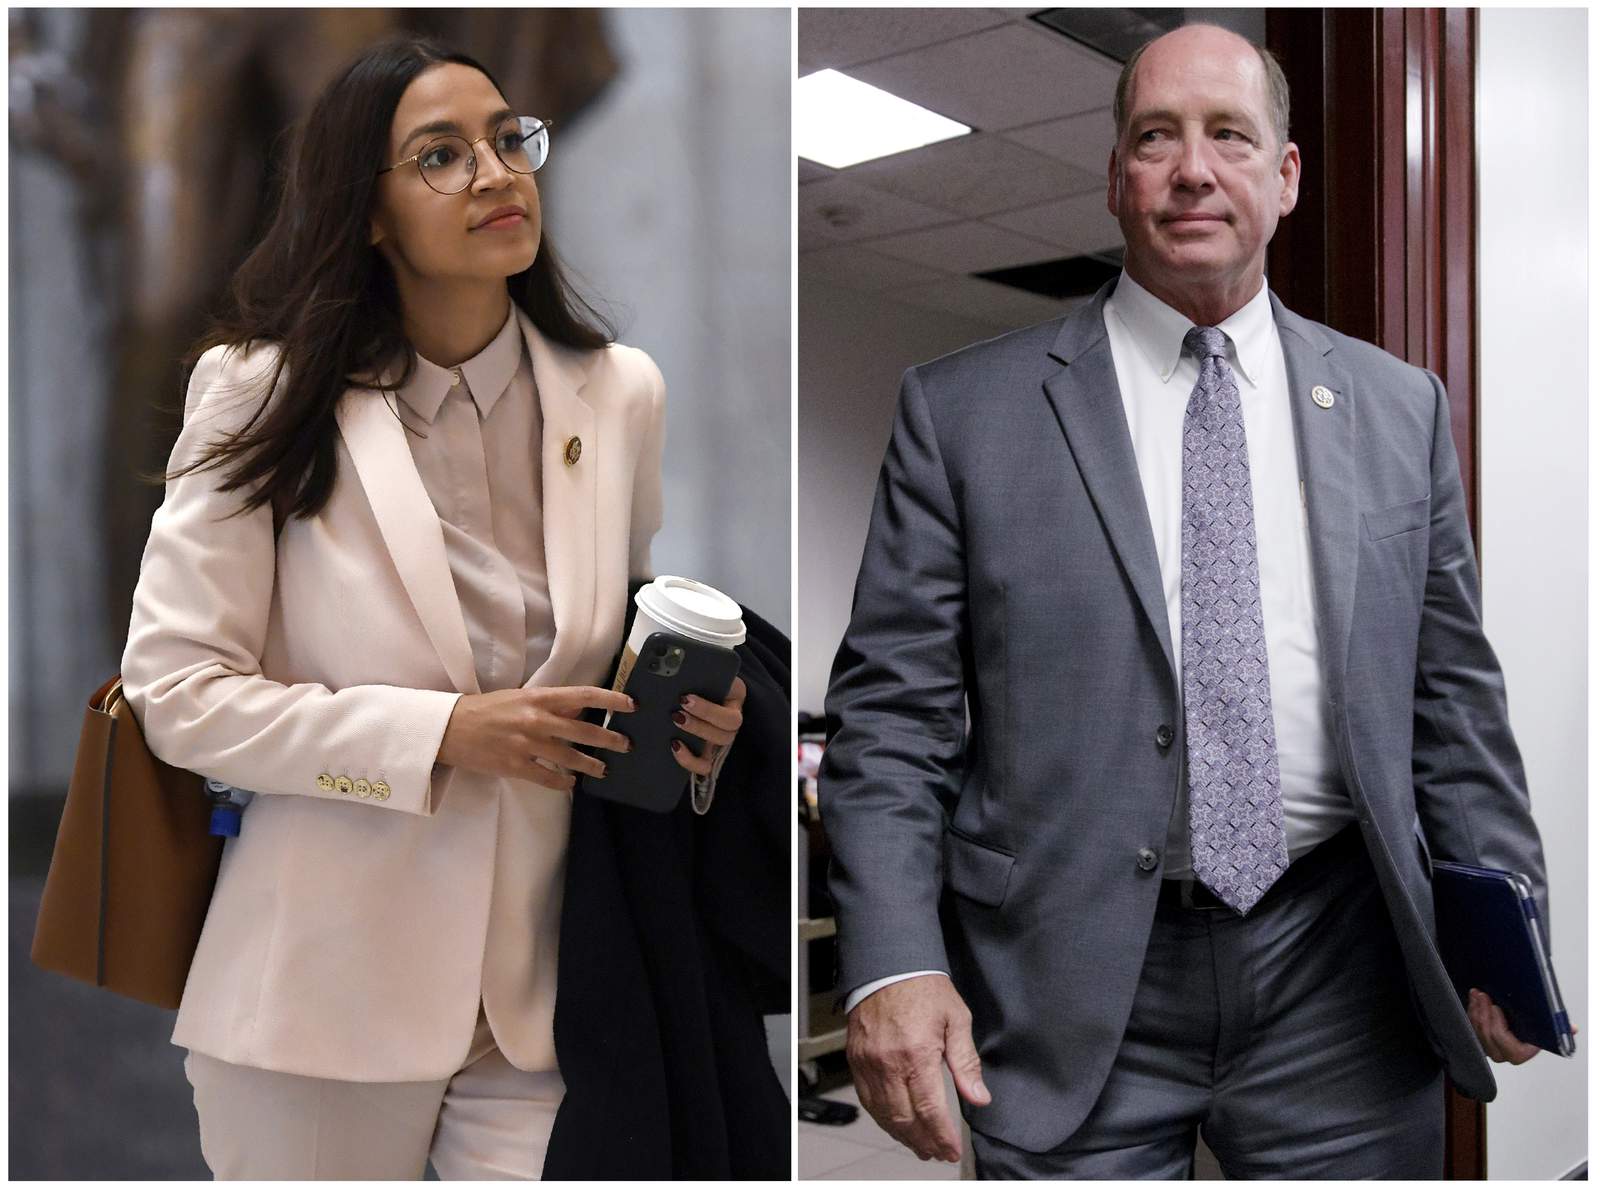 Ocasio-Cortez rejects GOP colleague's apology in verbal spat